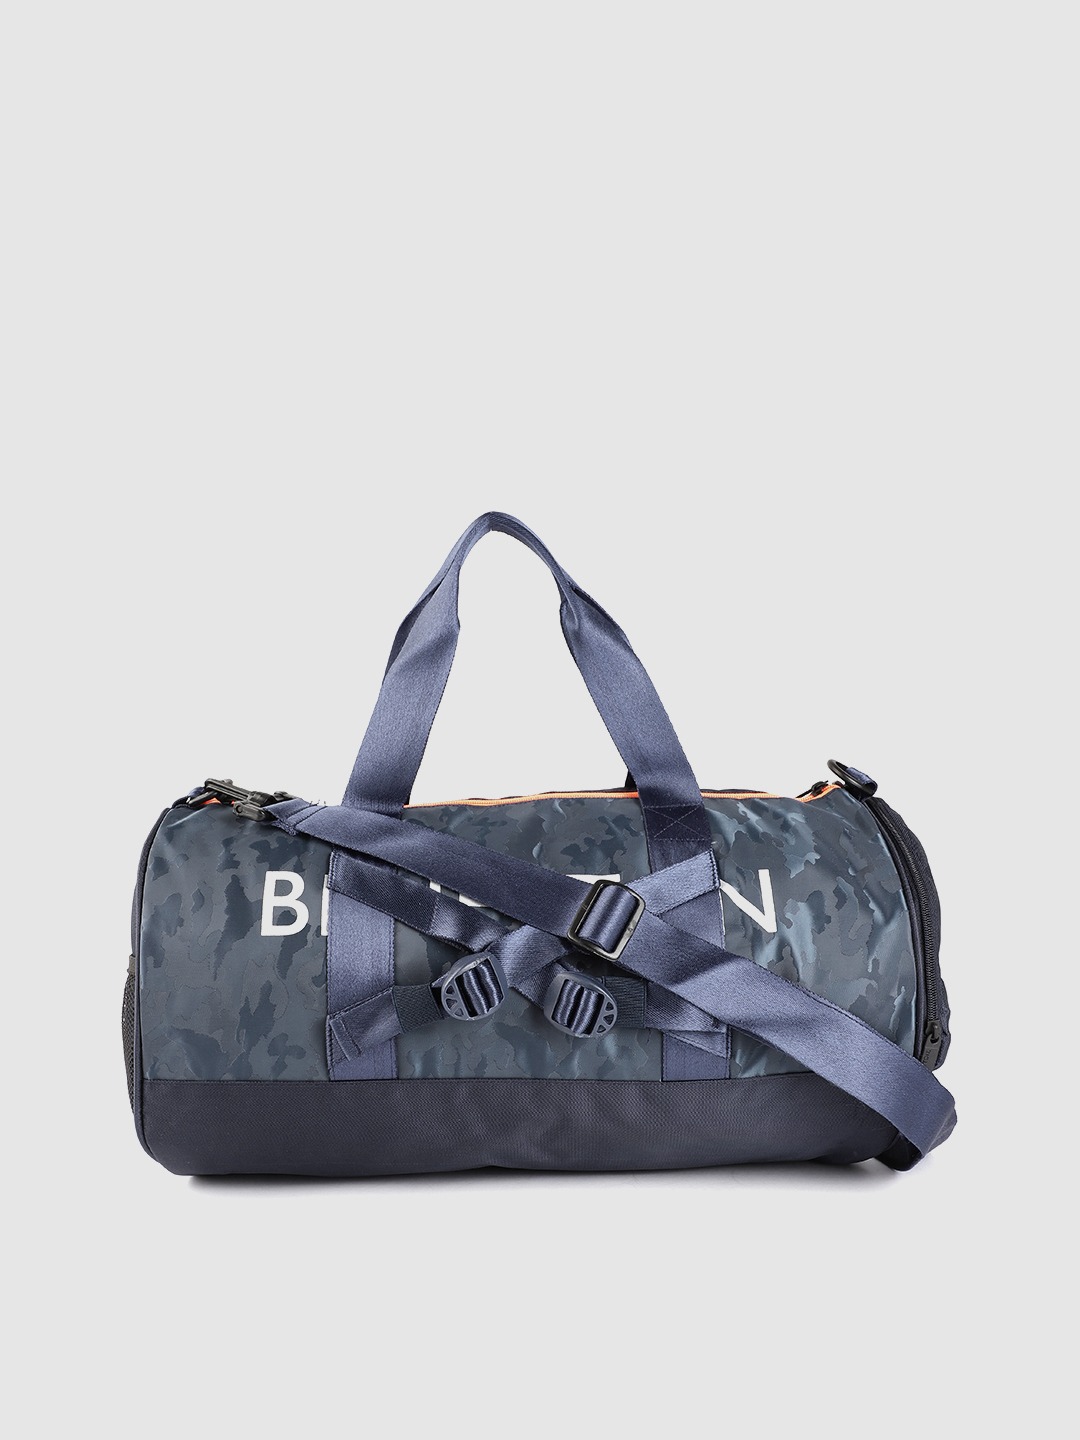 Accessories Duffel Bag | United Colors of Benetton Unisex Blue & White Brand Logo & Camouflage Print Gym Duffle Bag - HD24936